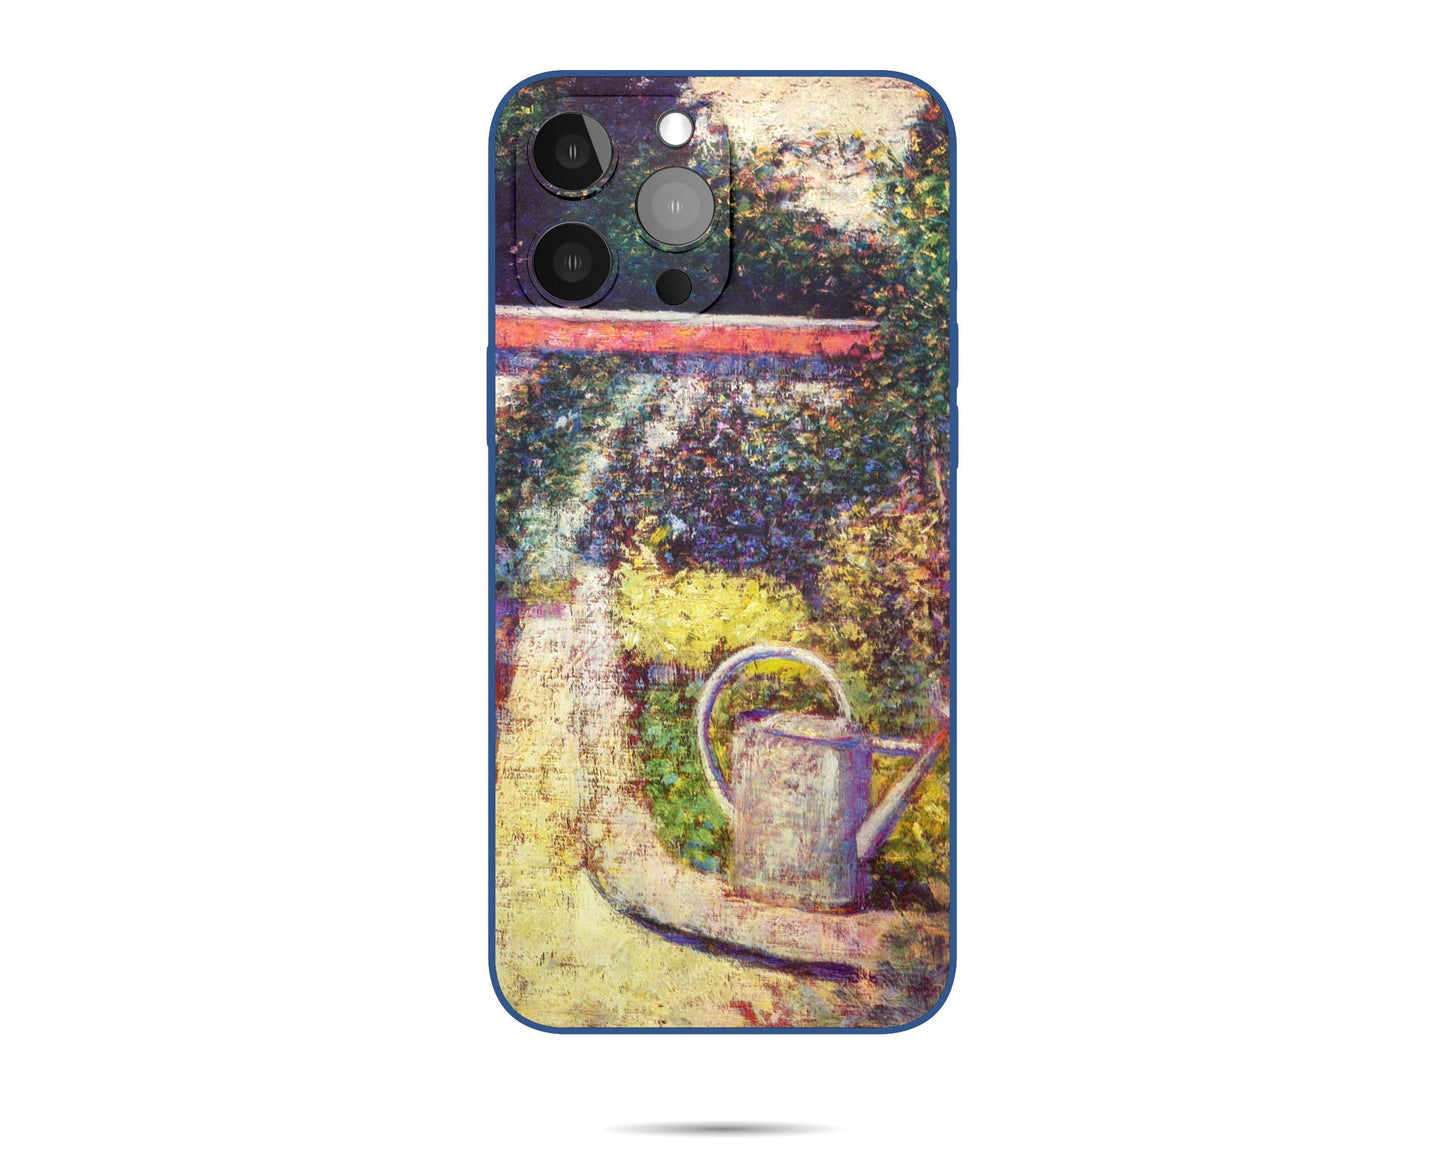 Iphone 14 Pro Max Case Of Georges Seura Famous Painting, Iphone 13 Pro Case, Iphone 7 Plus Case, Designer Iphone Case, Iphone Case Silicone